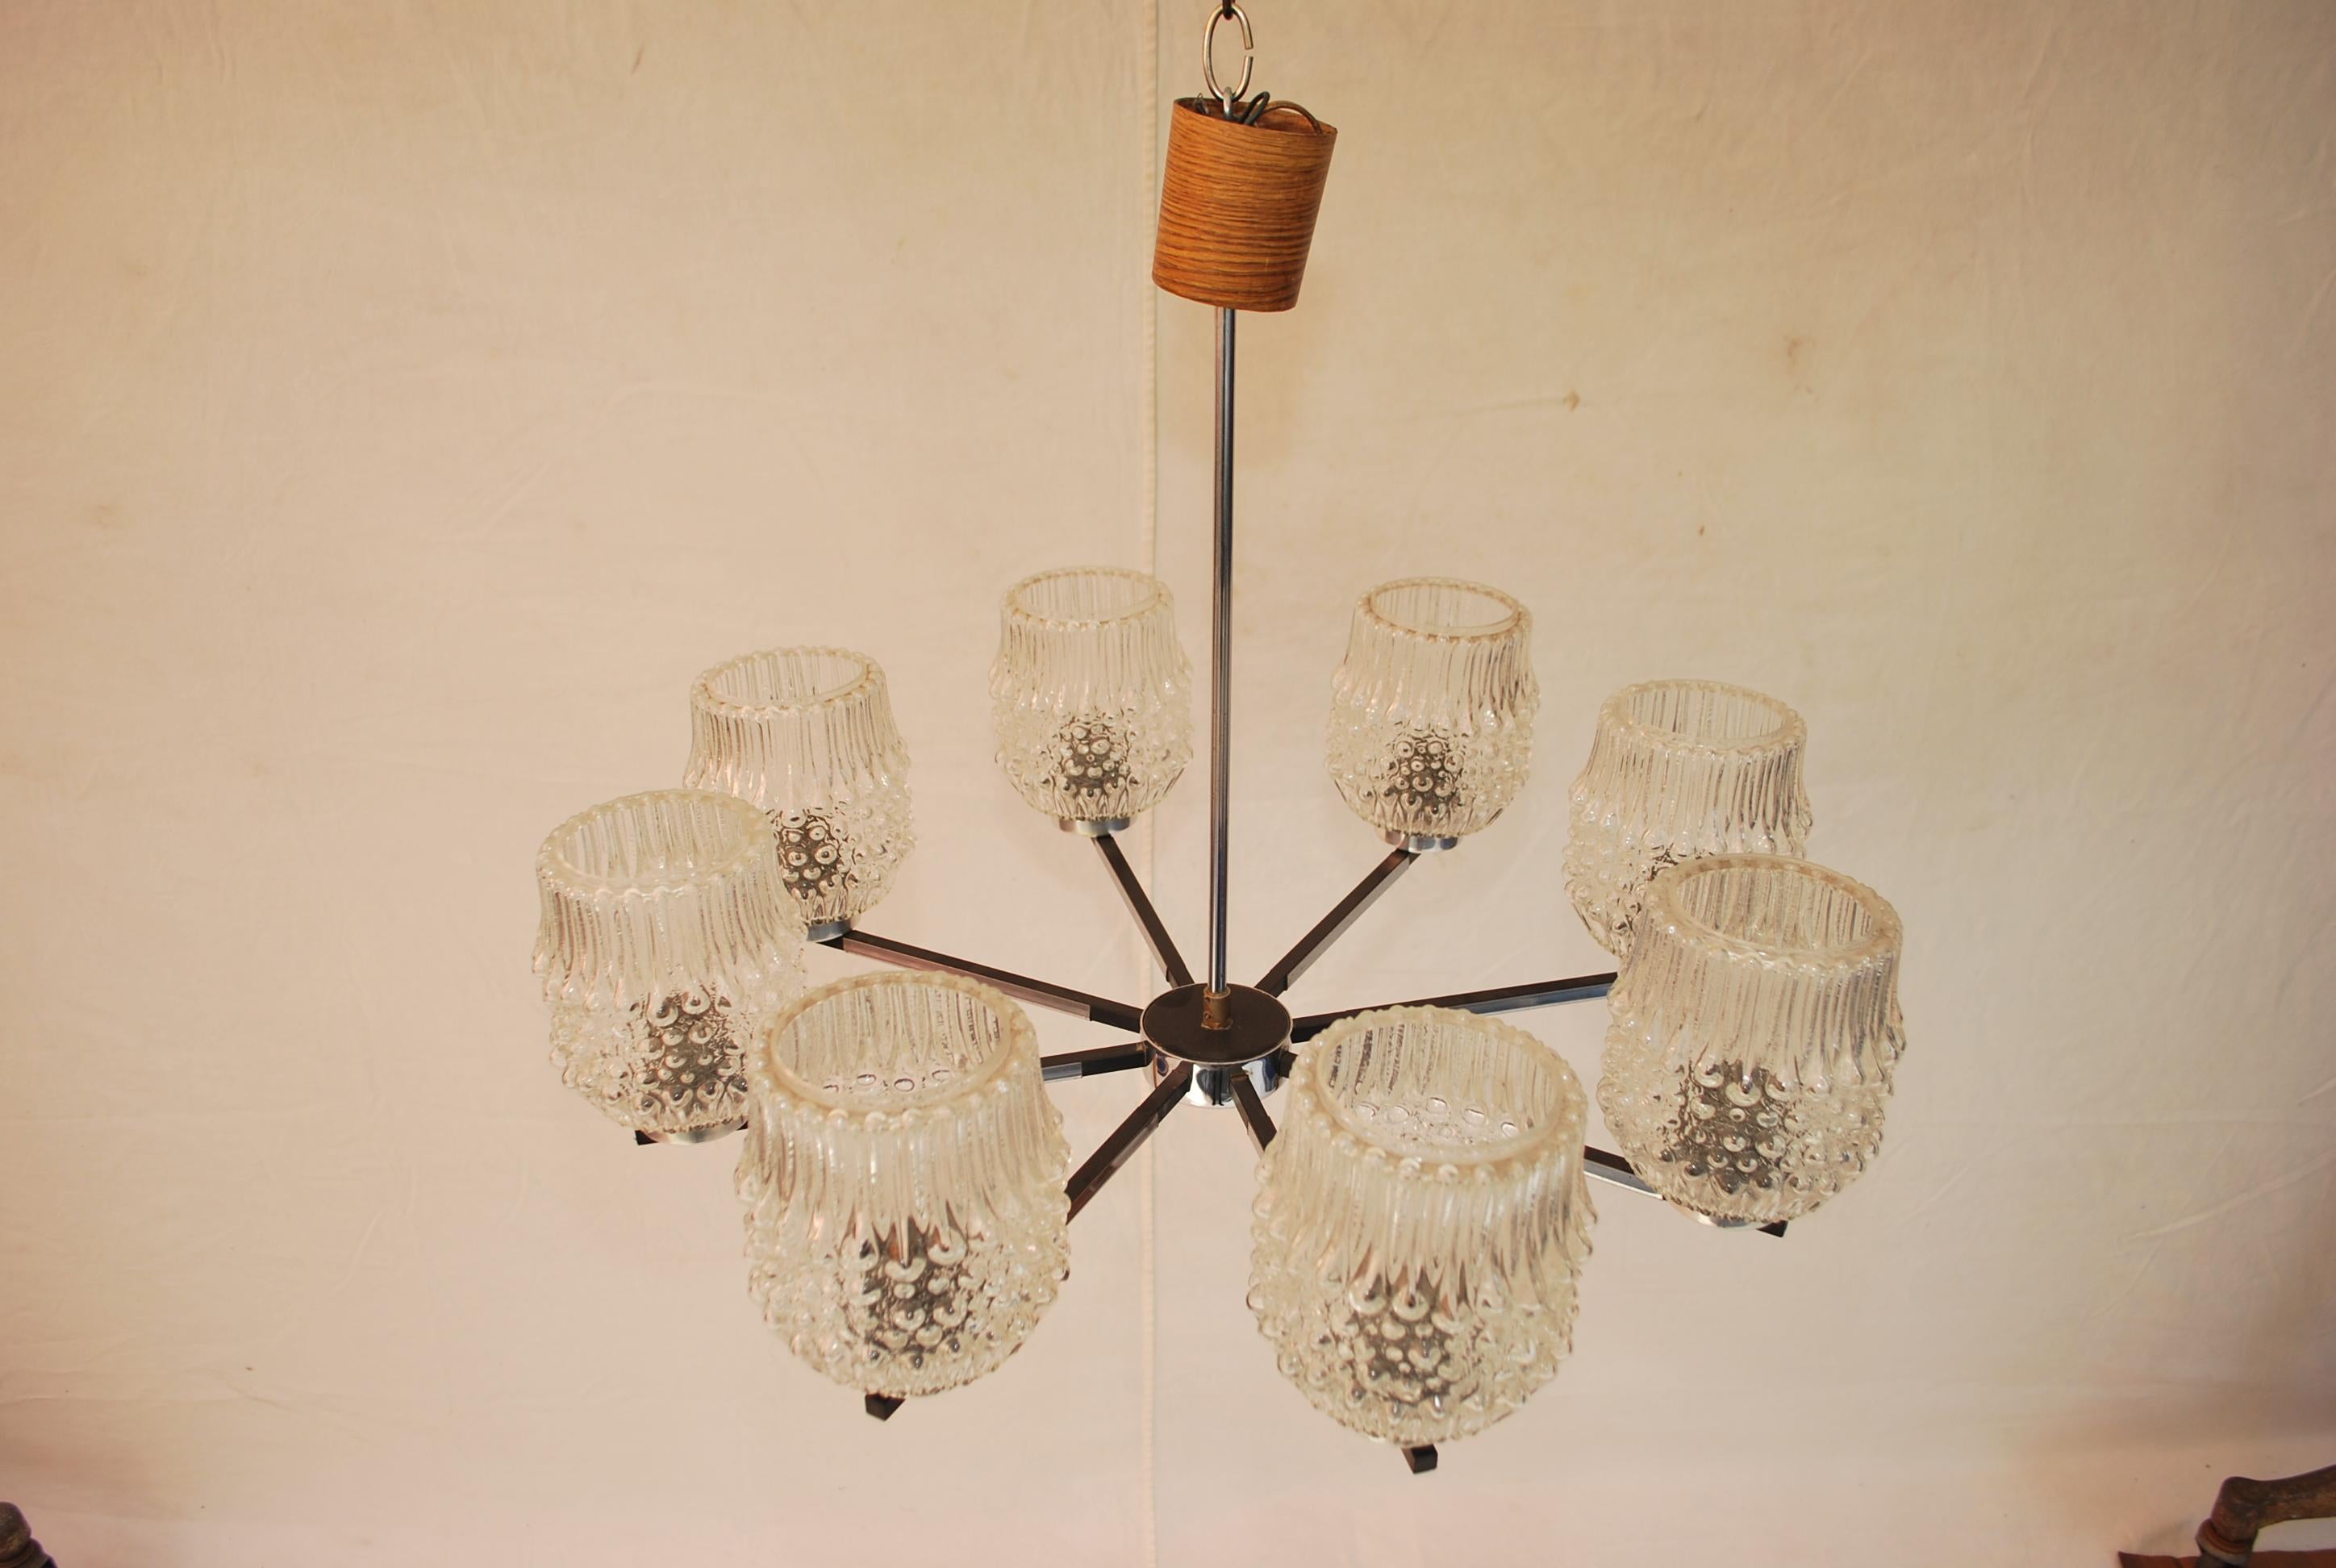 An Elegant 1950s chandelier from Germany.